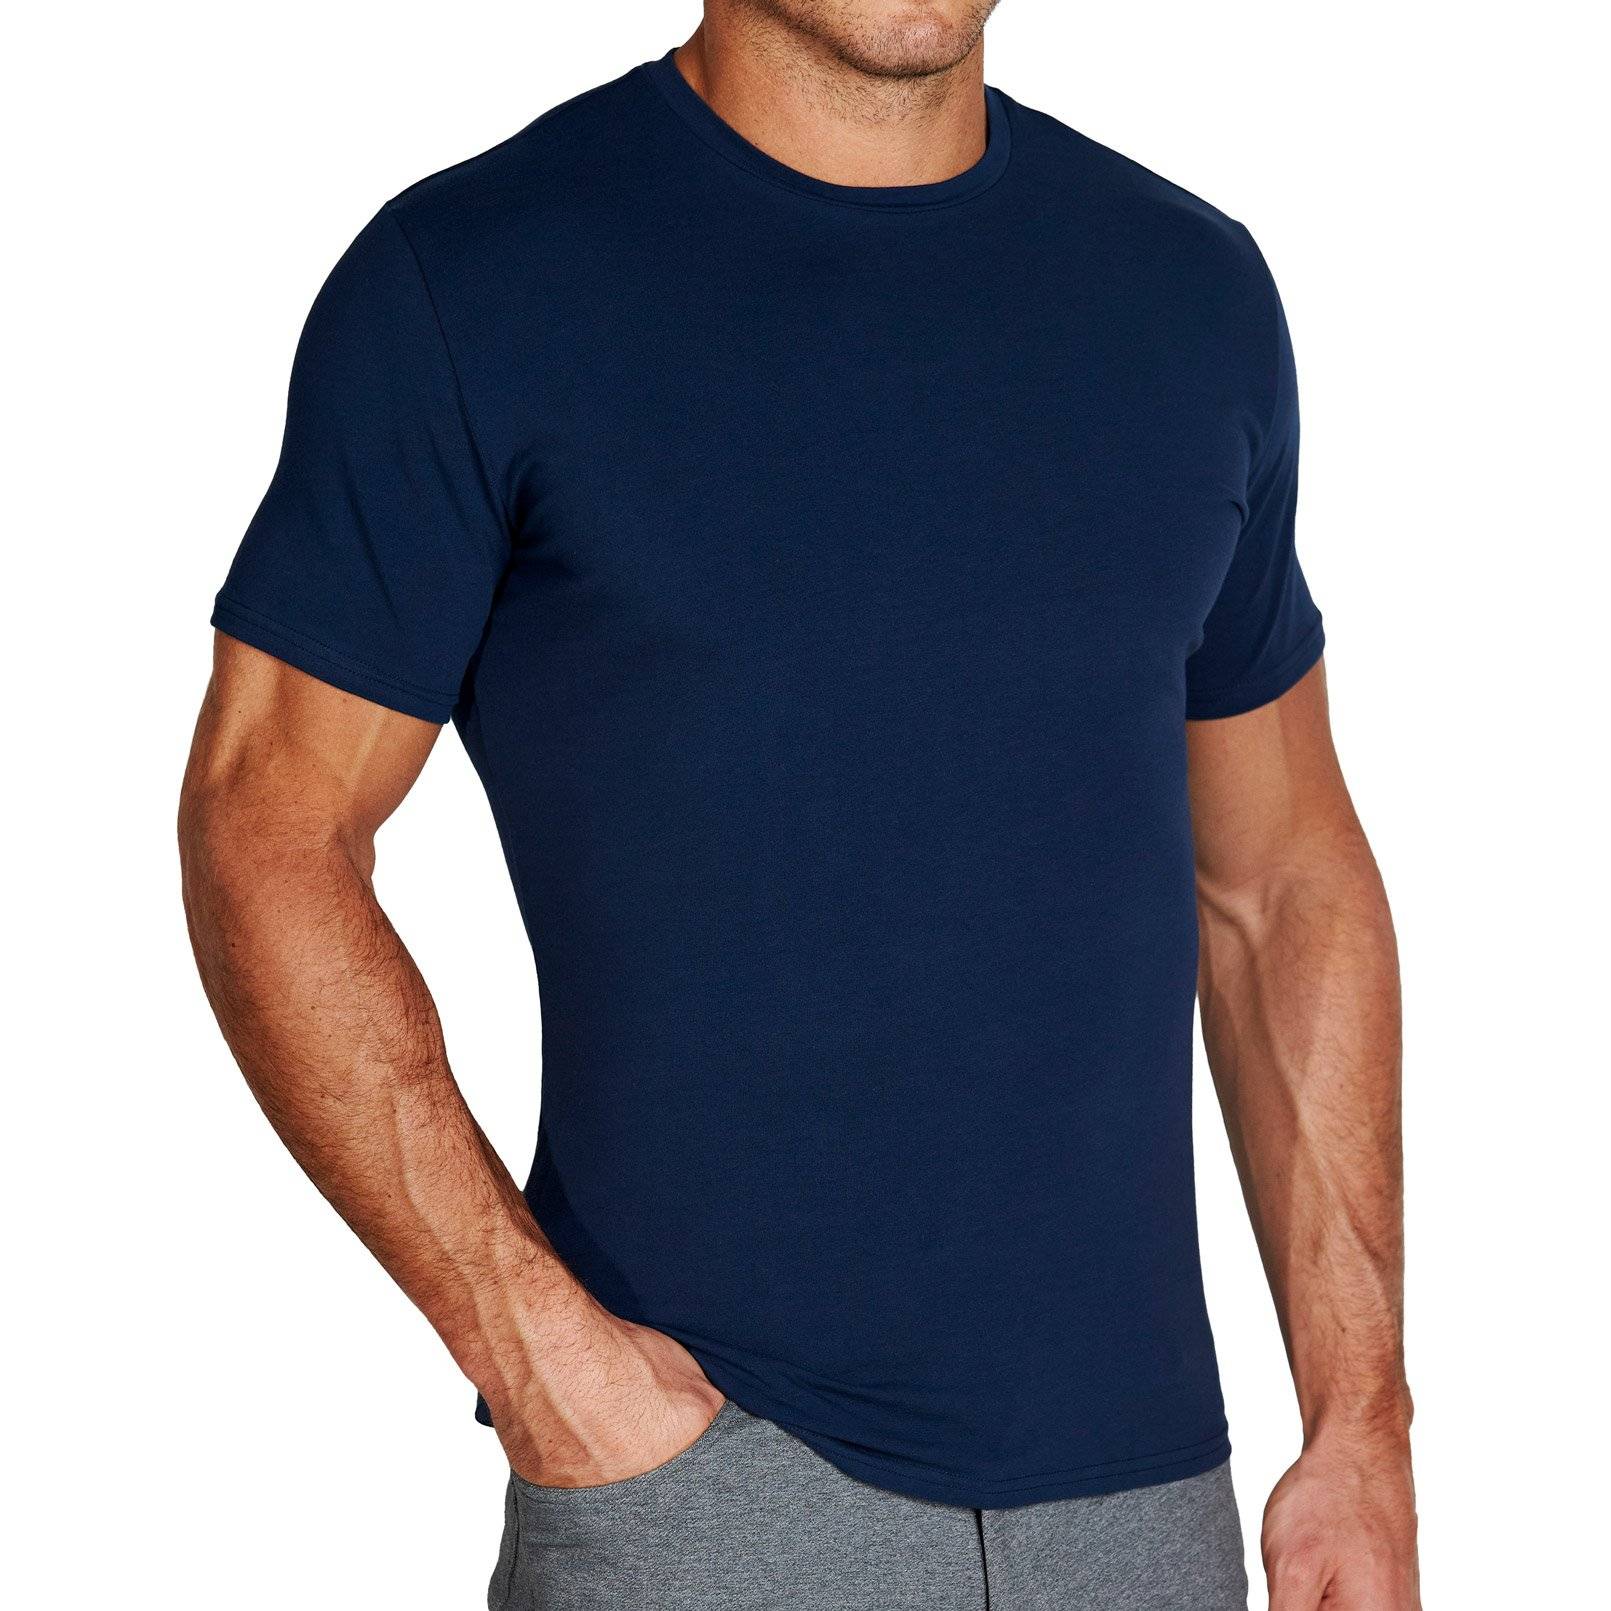 Best Fit T-Shirts for Men - Liberty Clothing Company